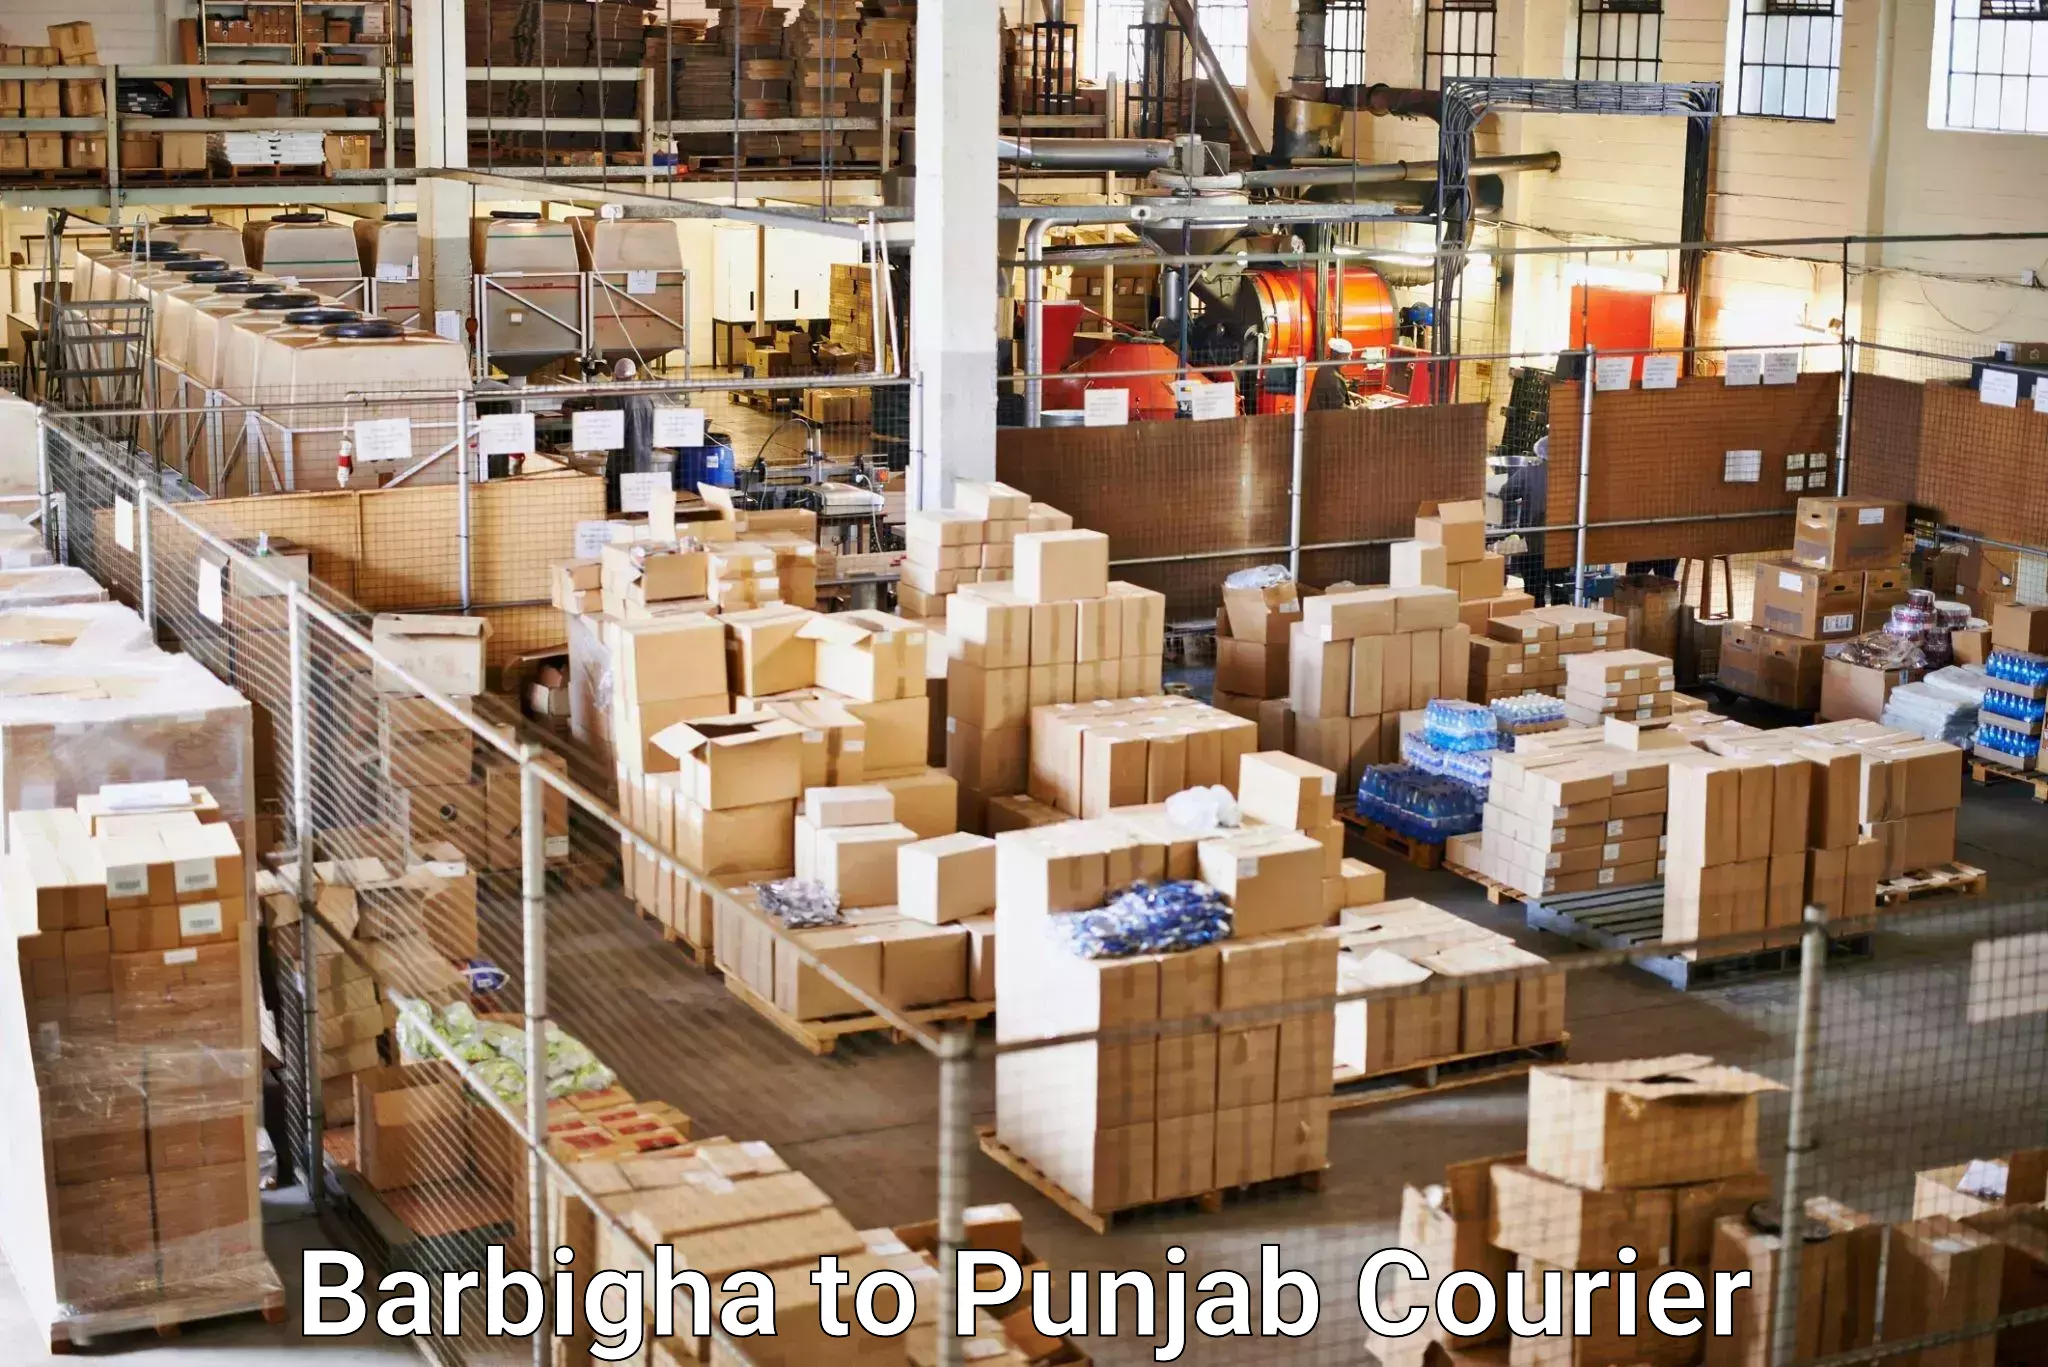 Express courier capabilities in Barbigha to Punjab